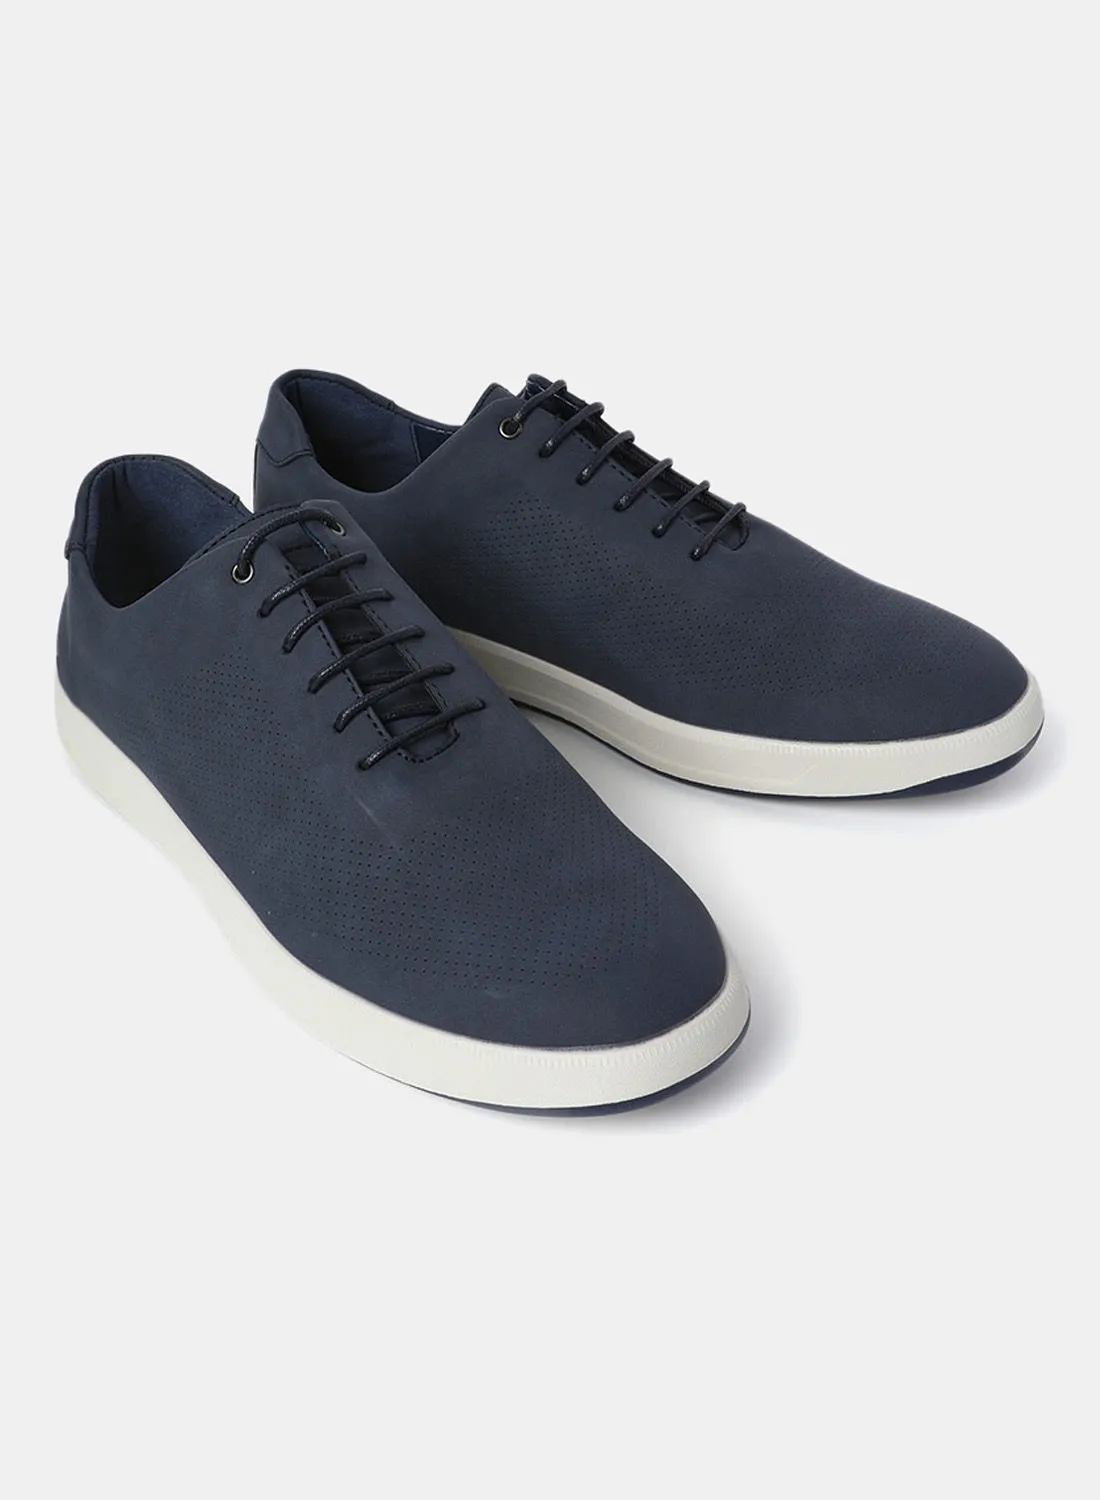 Athletiq Low Top Sneakers Navy Blue